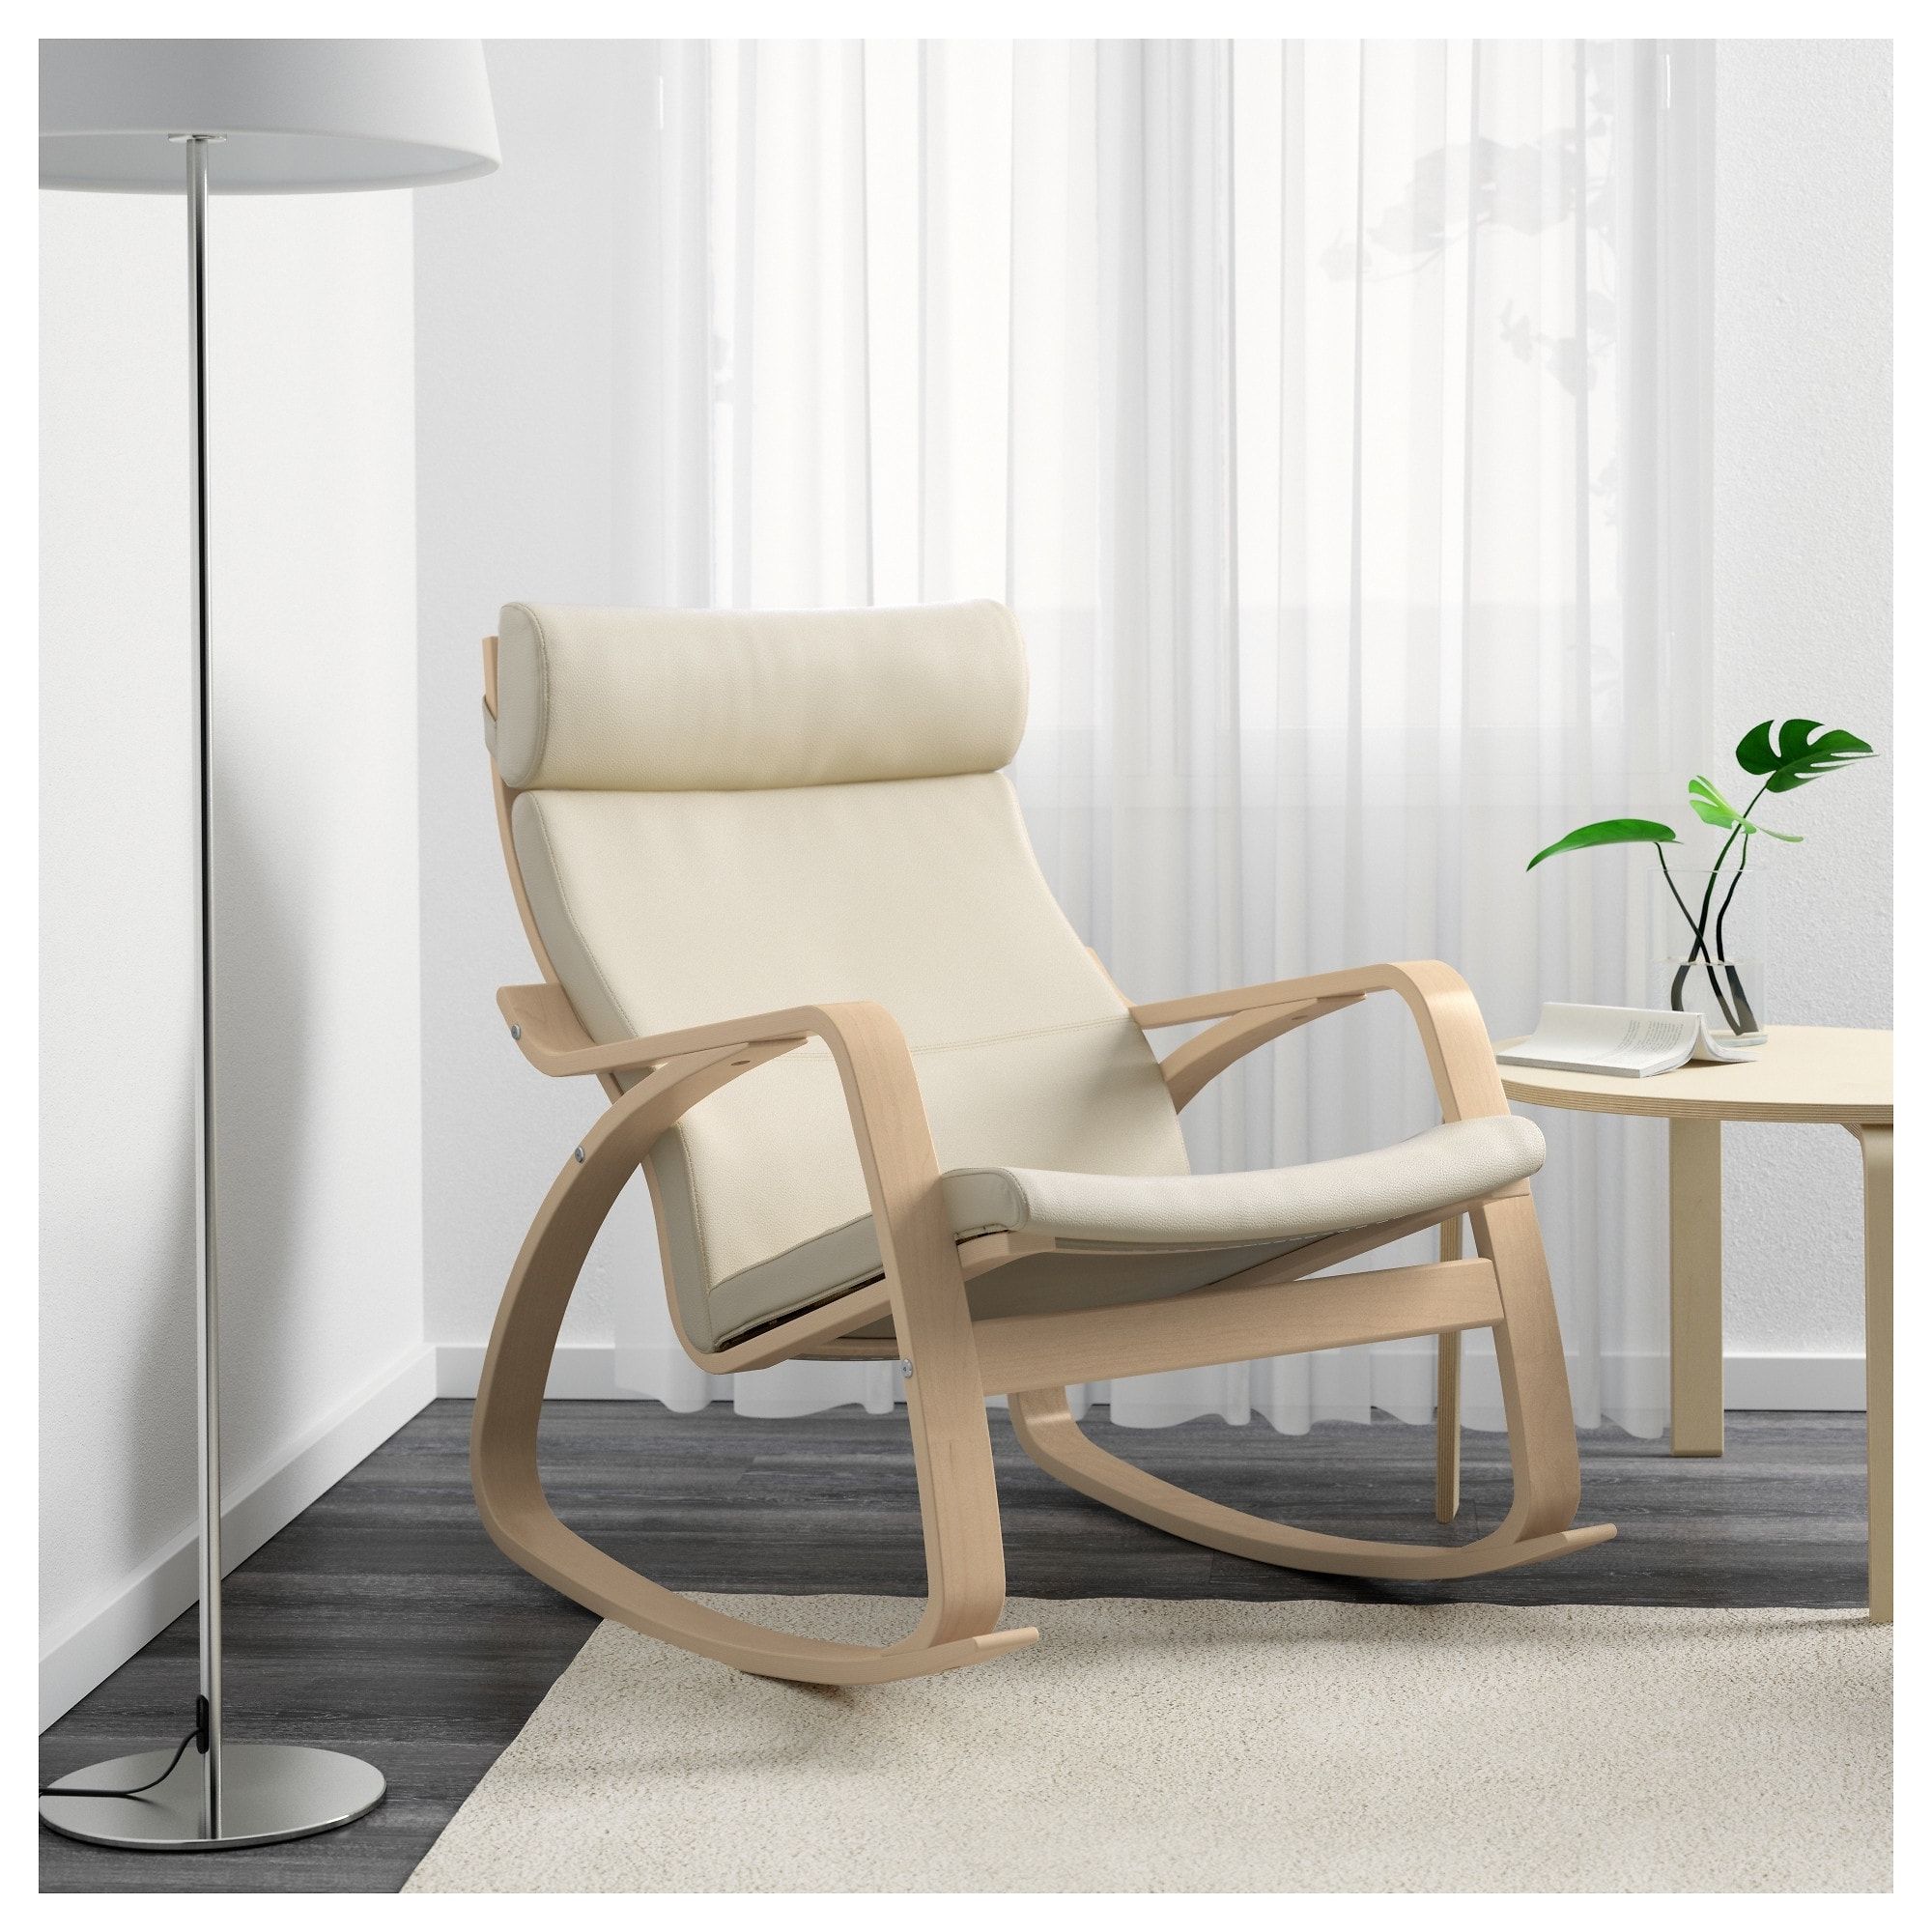 Ikea Rocking Chairs Intended For Most Up To Date Poäng Rocking Chair Birch Veneer/glose Eggshell – Ikea (View 1 of 20)